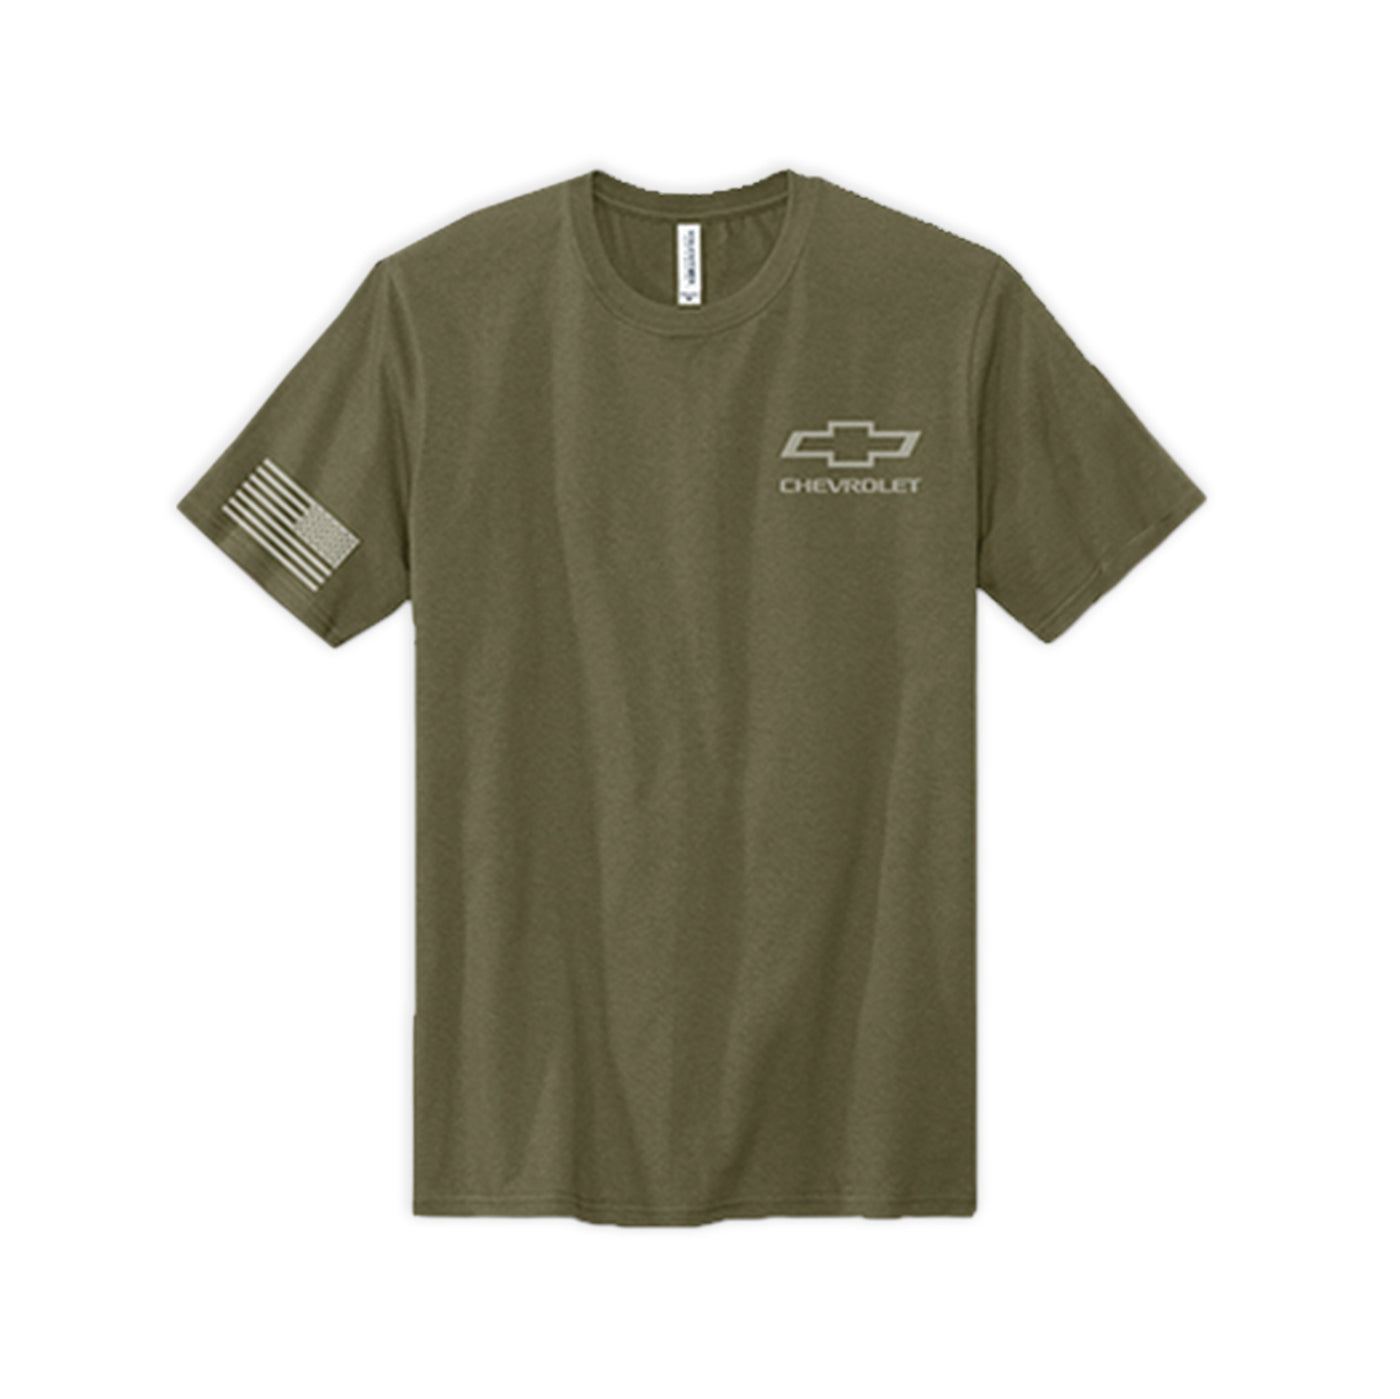 Chevrolet Patriot T-Shirt *Made In America